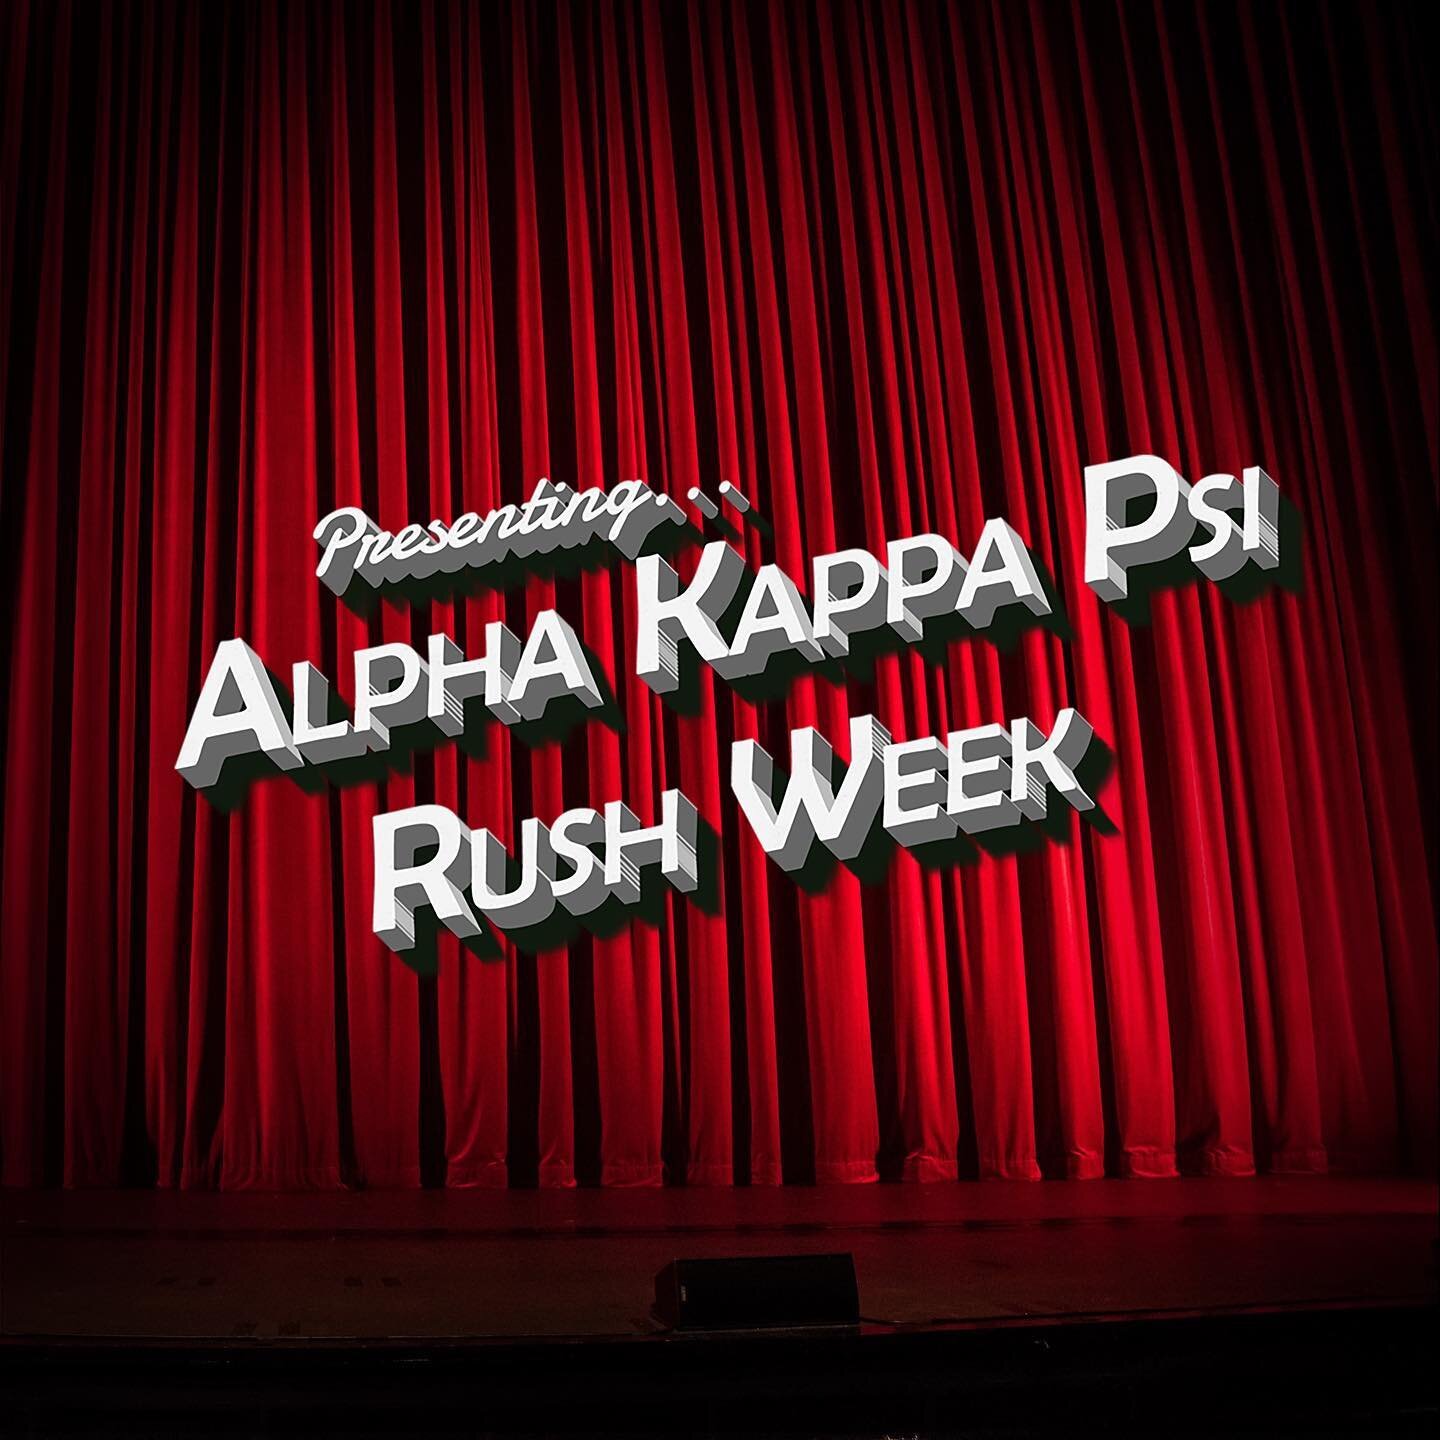 Lights&hellip; Camera&hellip; Action! 🎥

We want YOU to be the star of our Spring 2023 Recruitment. Join us for our recruitment week starting February 6th to learn more about our brothers, our values, and the many unique opportunities we have to off